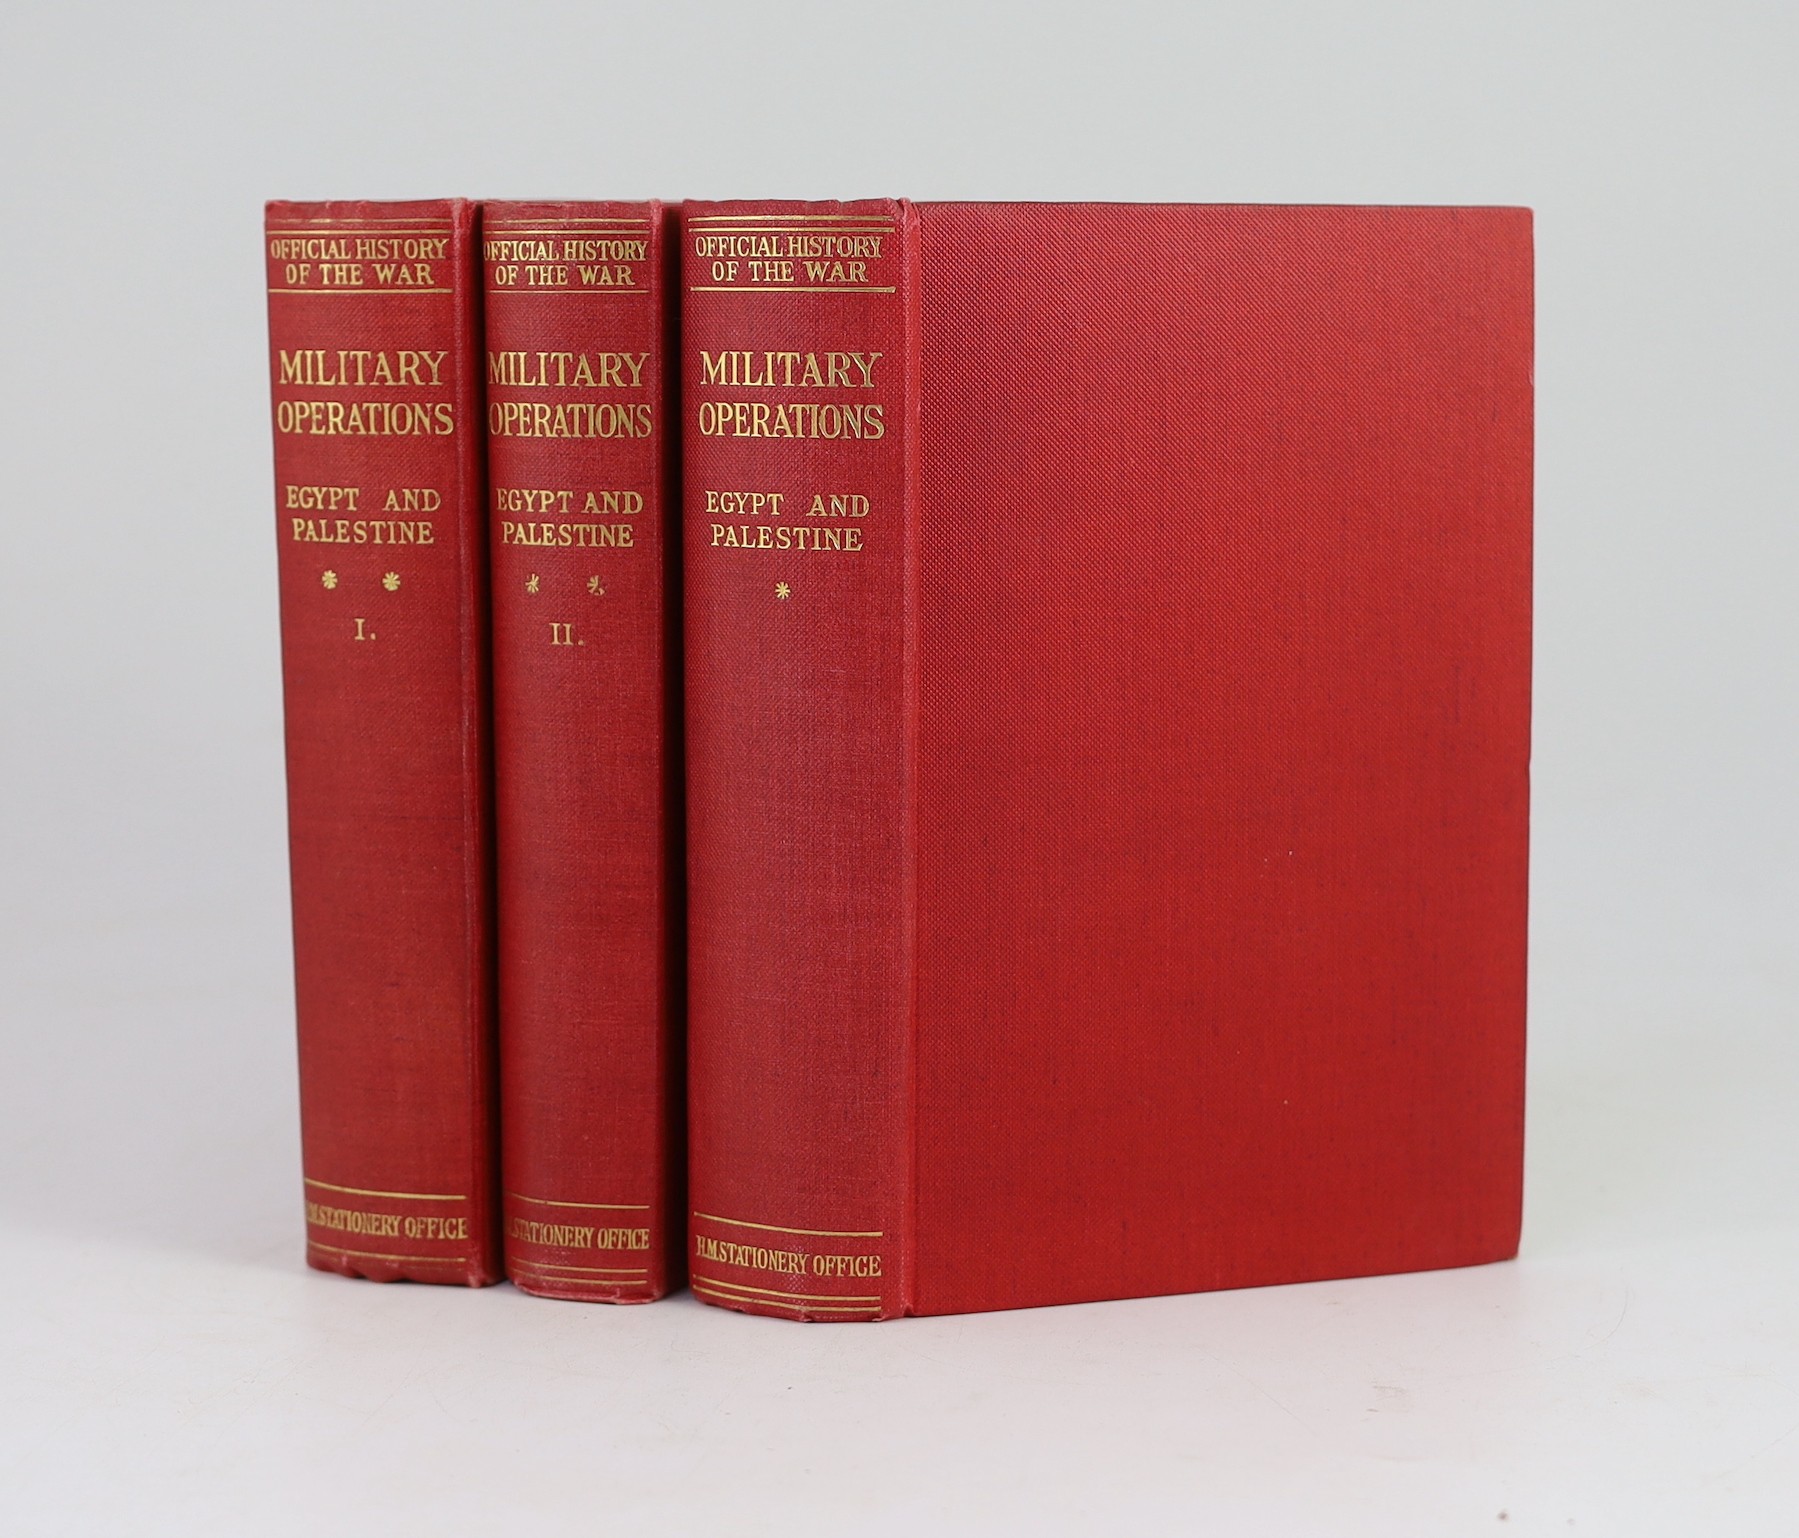 MacMunn, George Fletcher, Sir and Falls, Cyril, Military Operations Egypt & Palestine, 3 vols and 2 cloth drop-front boxes, 8vo, original red cloth, with 38 folded maps, sketches and photographs, HMSO, London, 1928-30